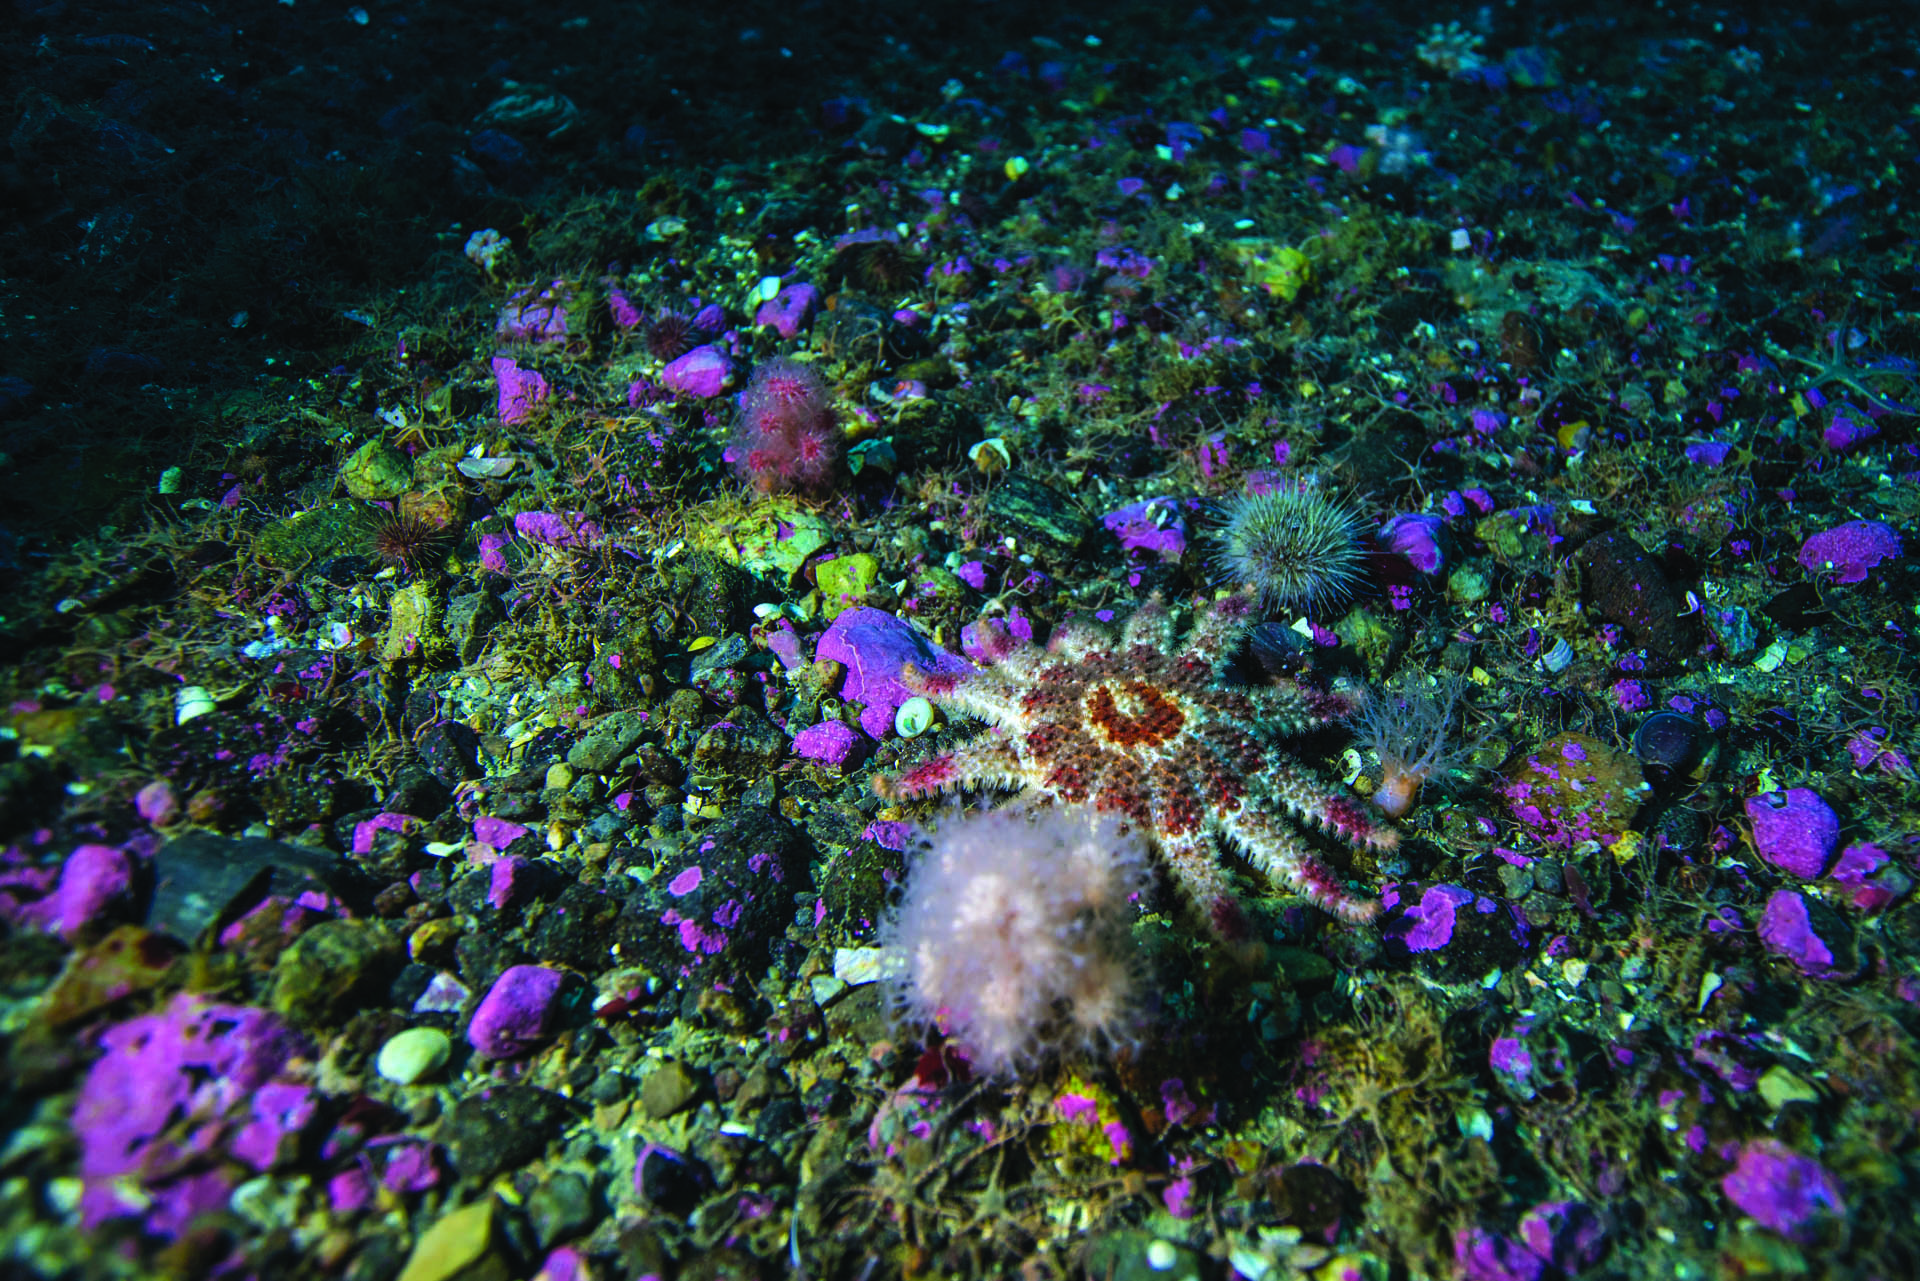 A rose sea star and sea anemones on the bottom of the Arctic Ocean.  